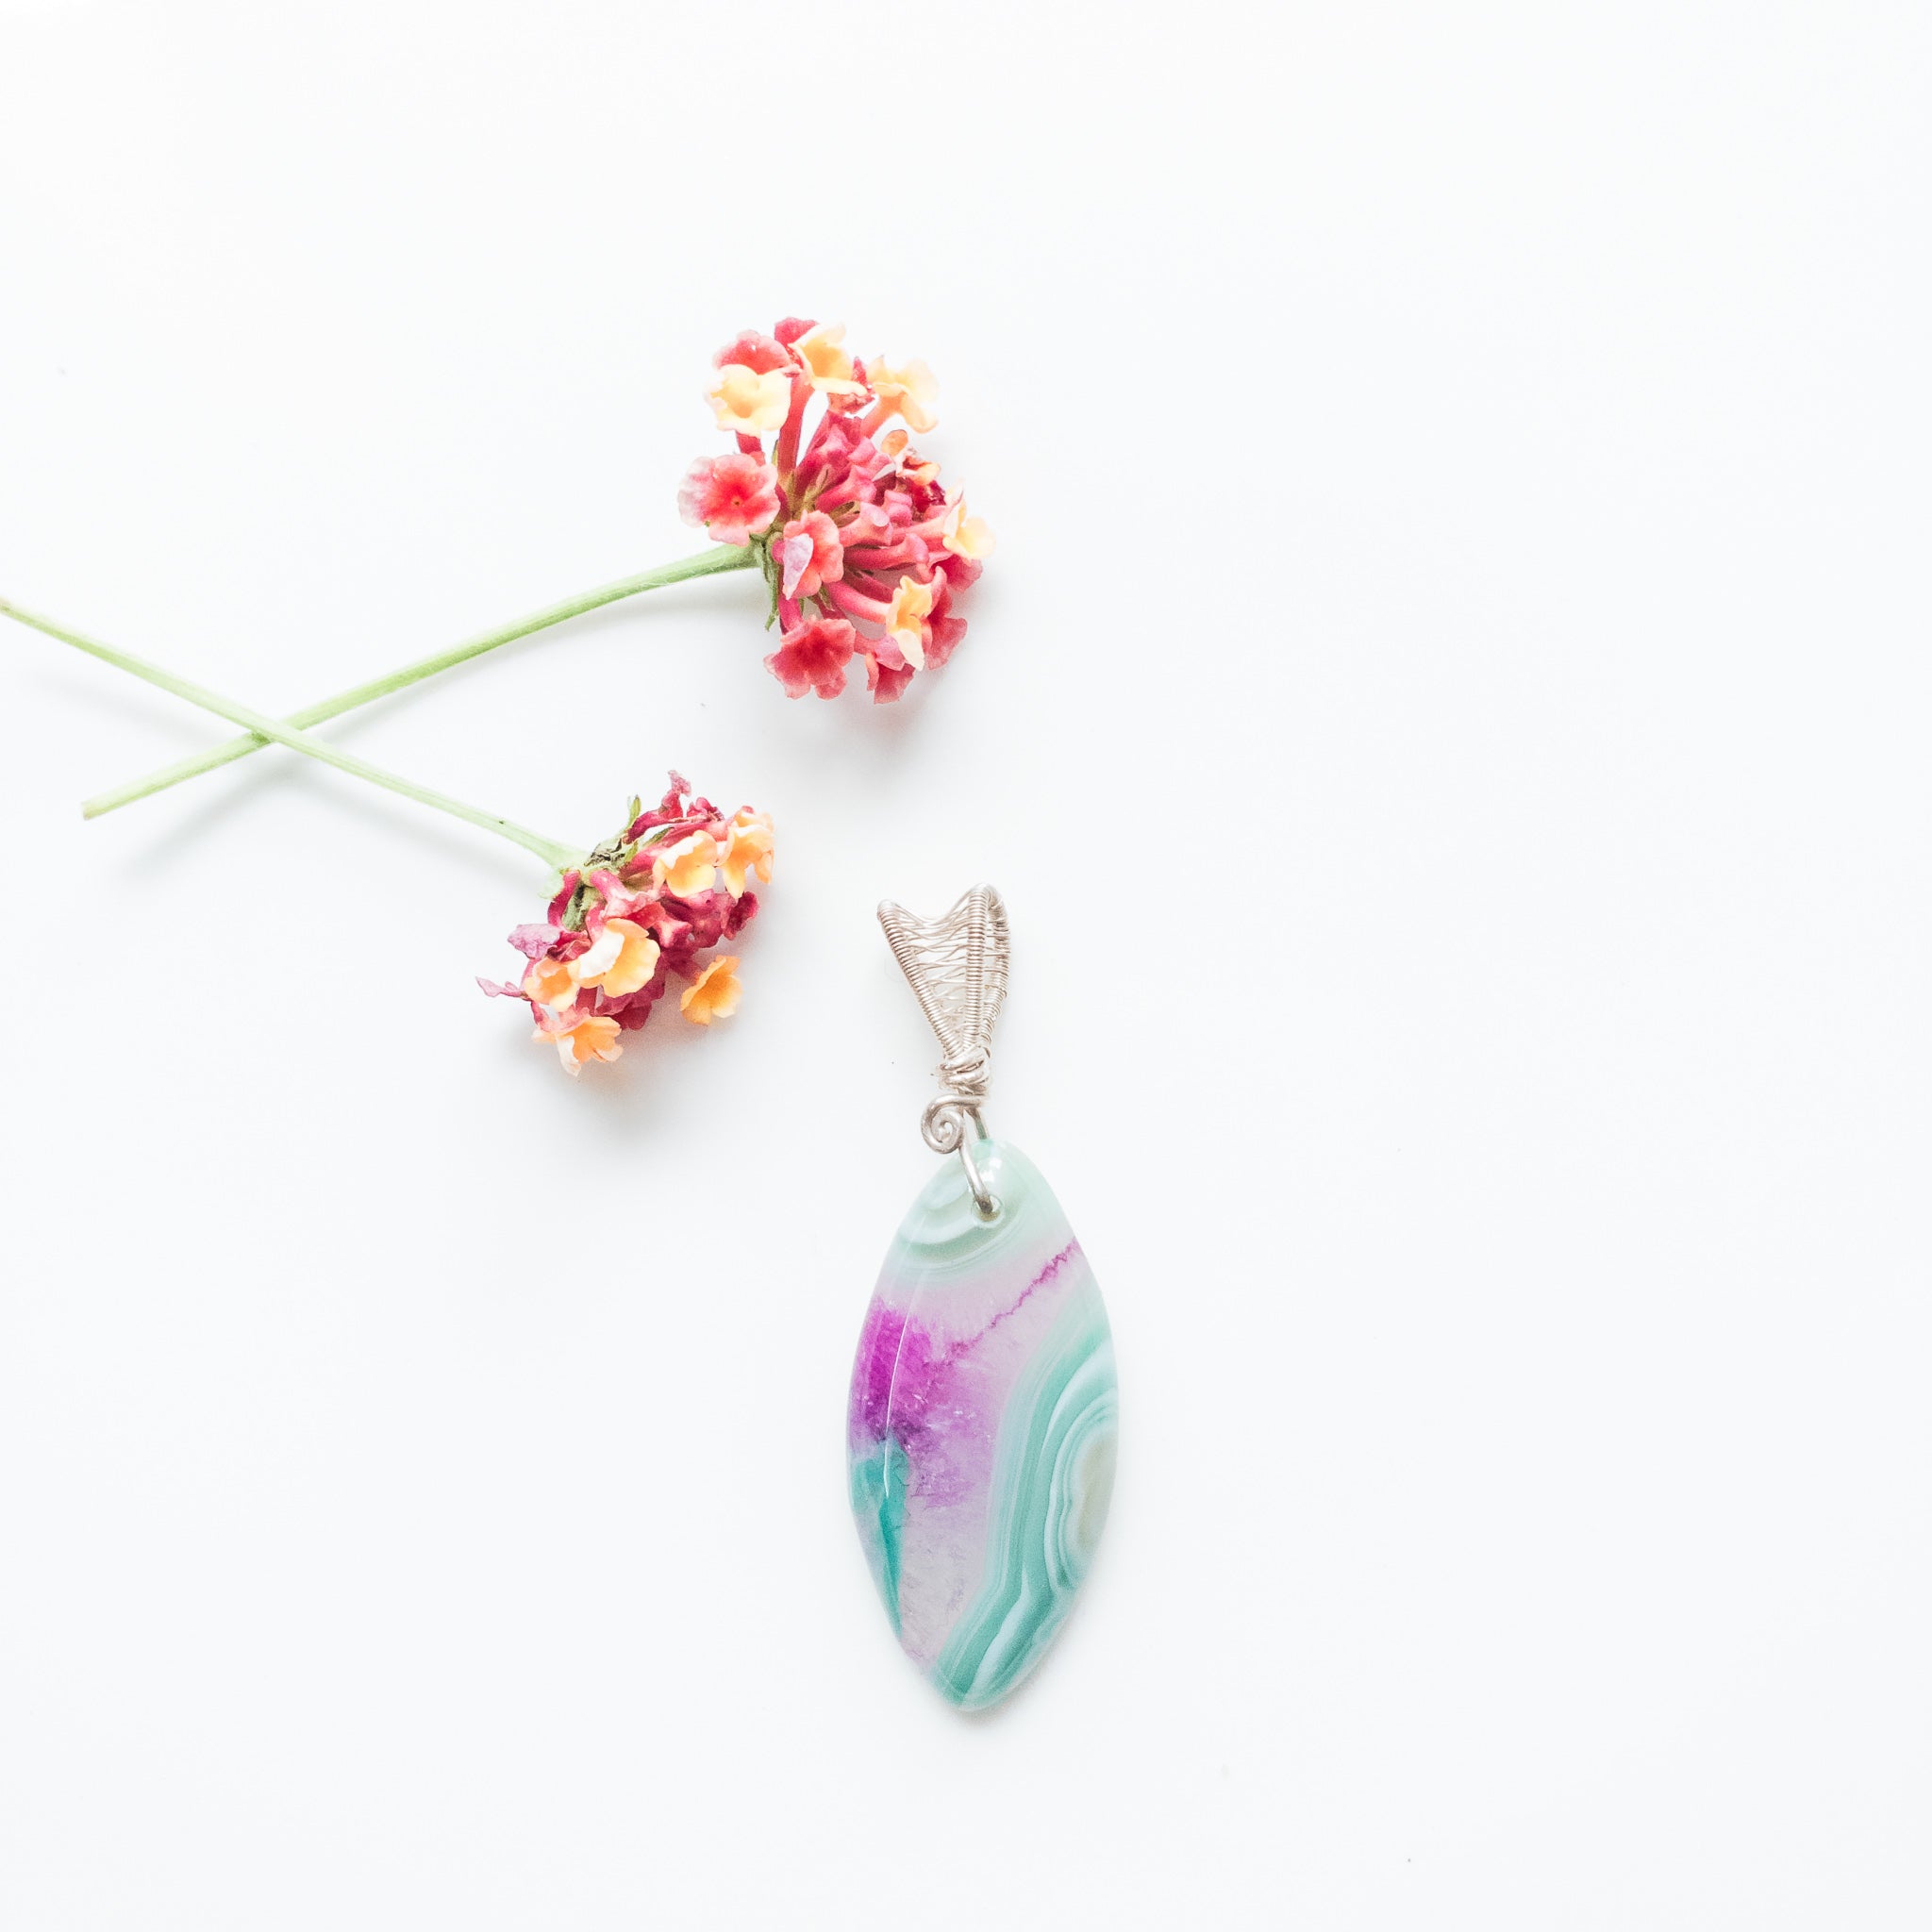 Rio Collection - Rio Collection - Beautiful Fuchsia and Teal Geode Pendant in Sterling Silver front view - BellaChel Jeweler